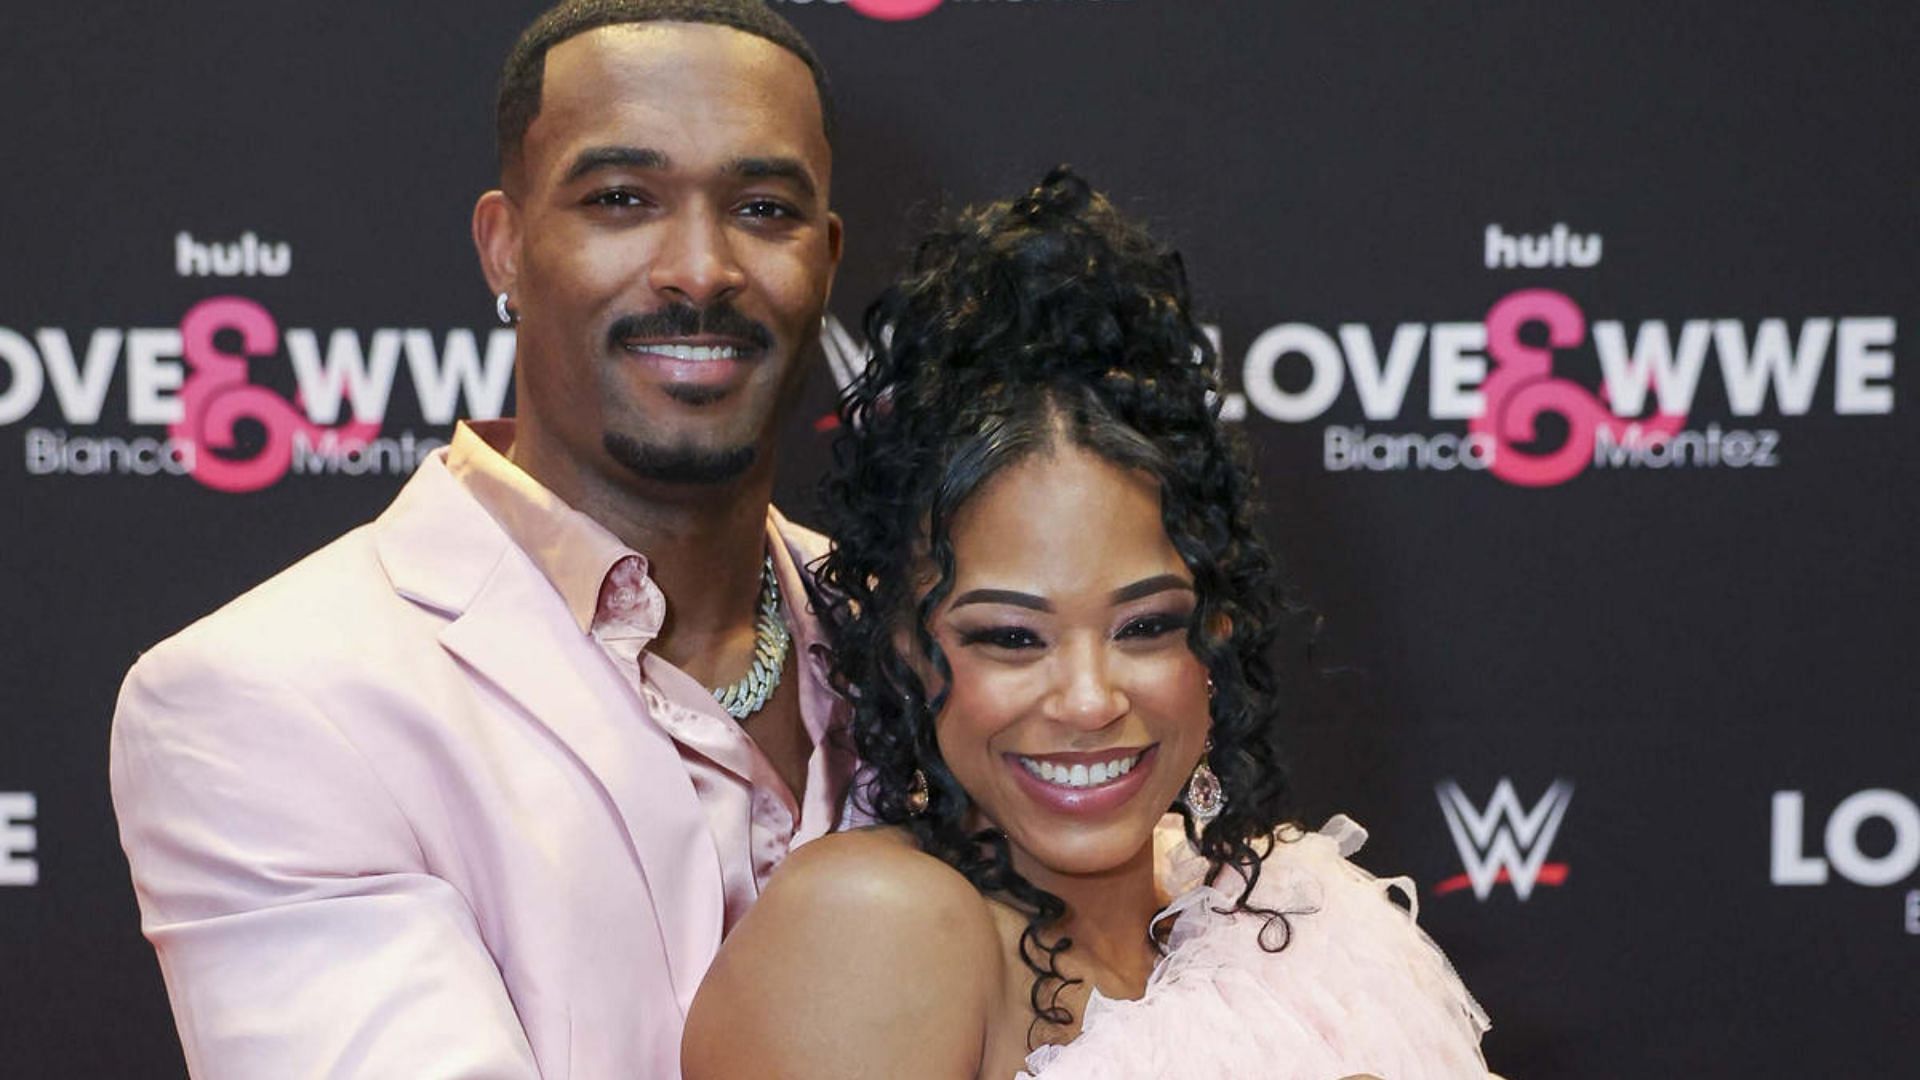 Montez Ford and Bianca Belair promoting their new show